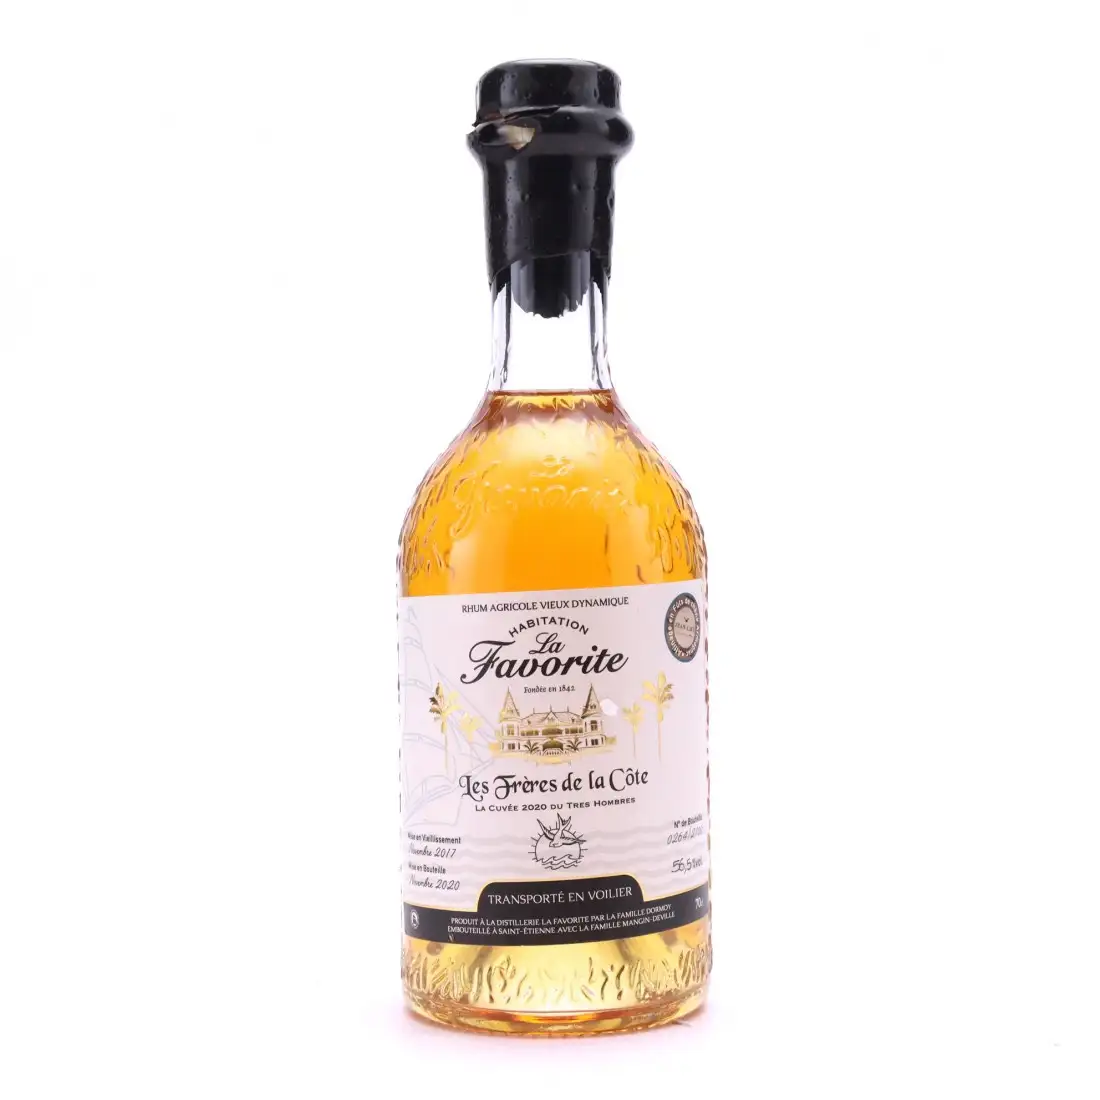 Image of the front of the bottle of the rum Rhum vieux dynamique 2020